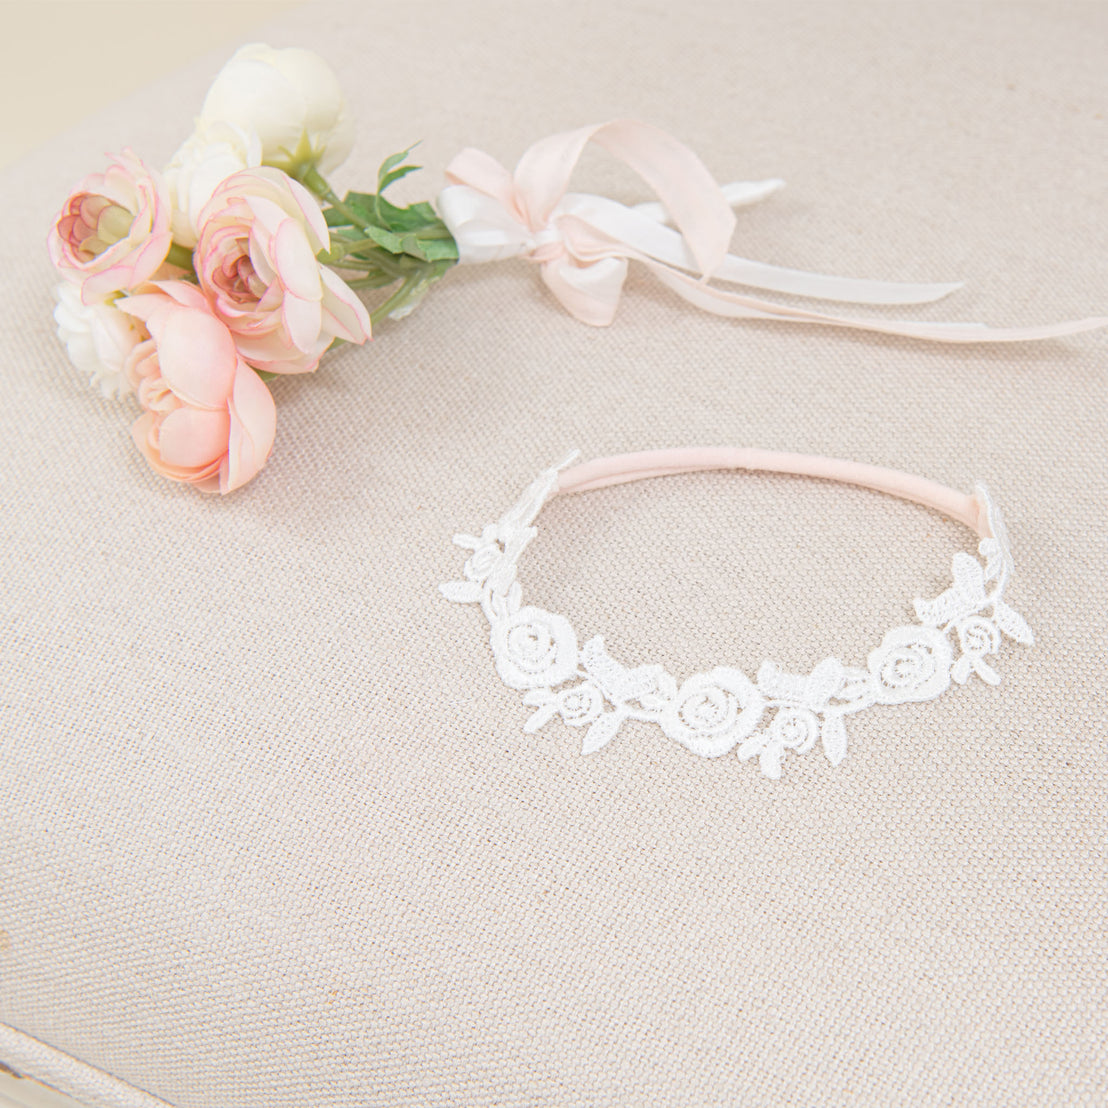 A delicate Rose Lace Headband beside a bouquet of soft pink and white flowers tied with a light pink ribbon, all set against a textured beige background.